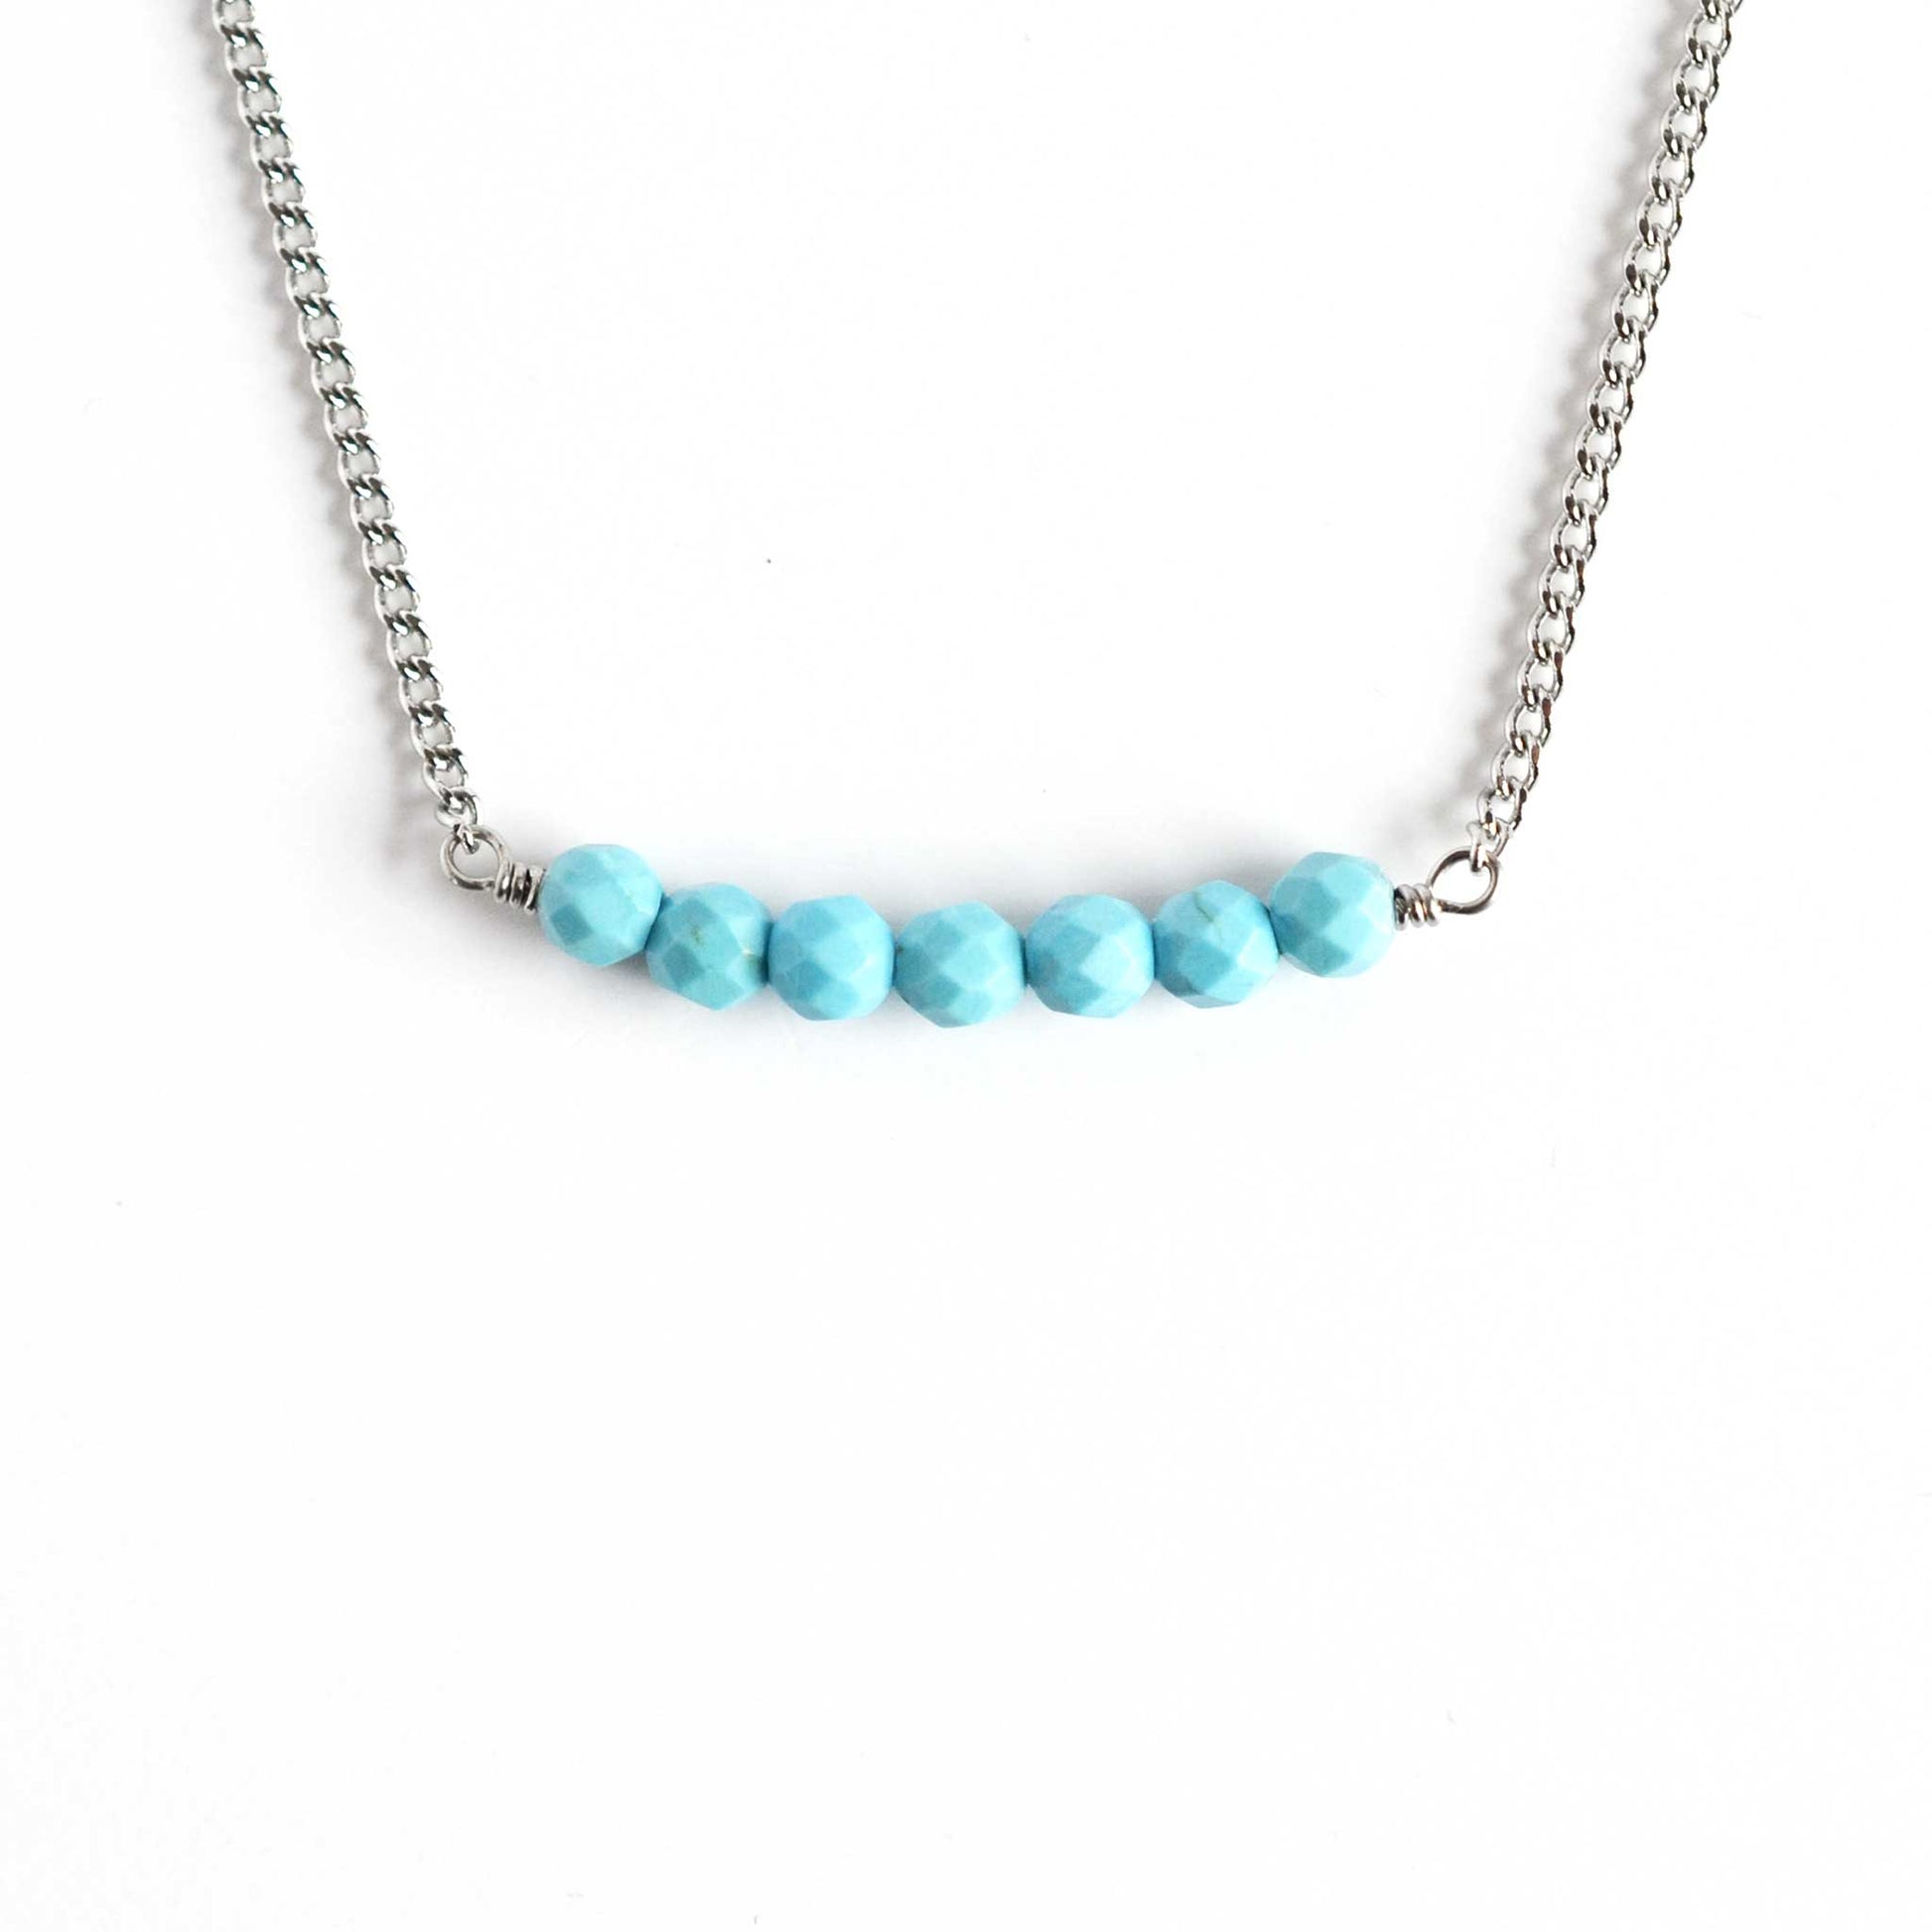 Turquoise bar necklace with stainless steel chain on white background